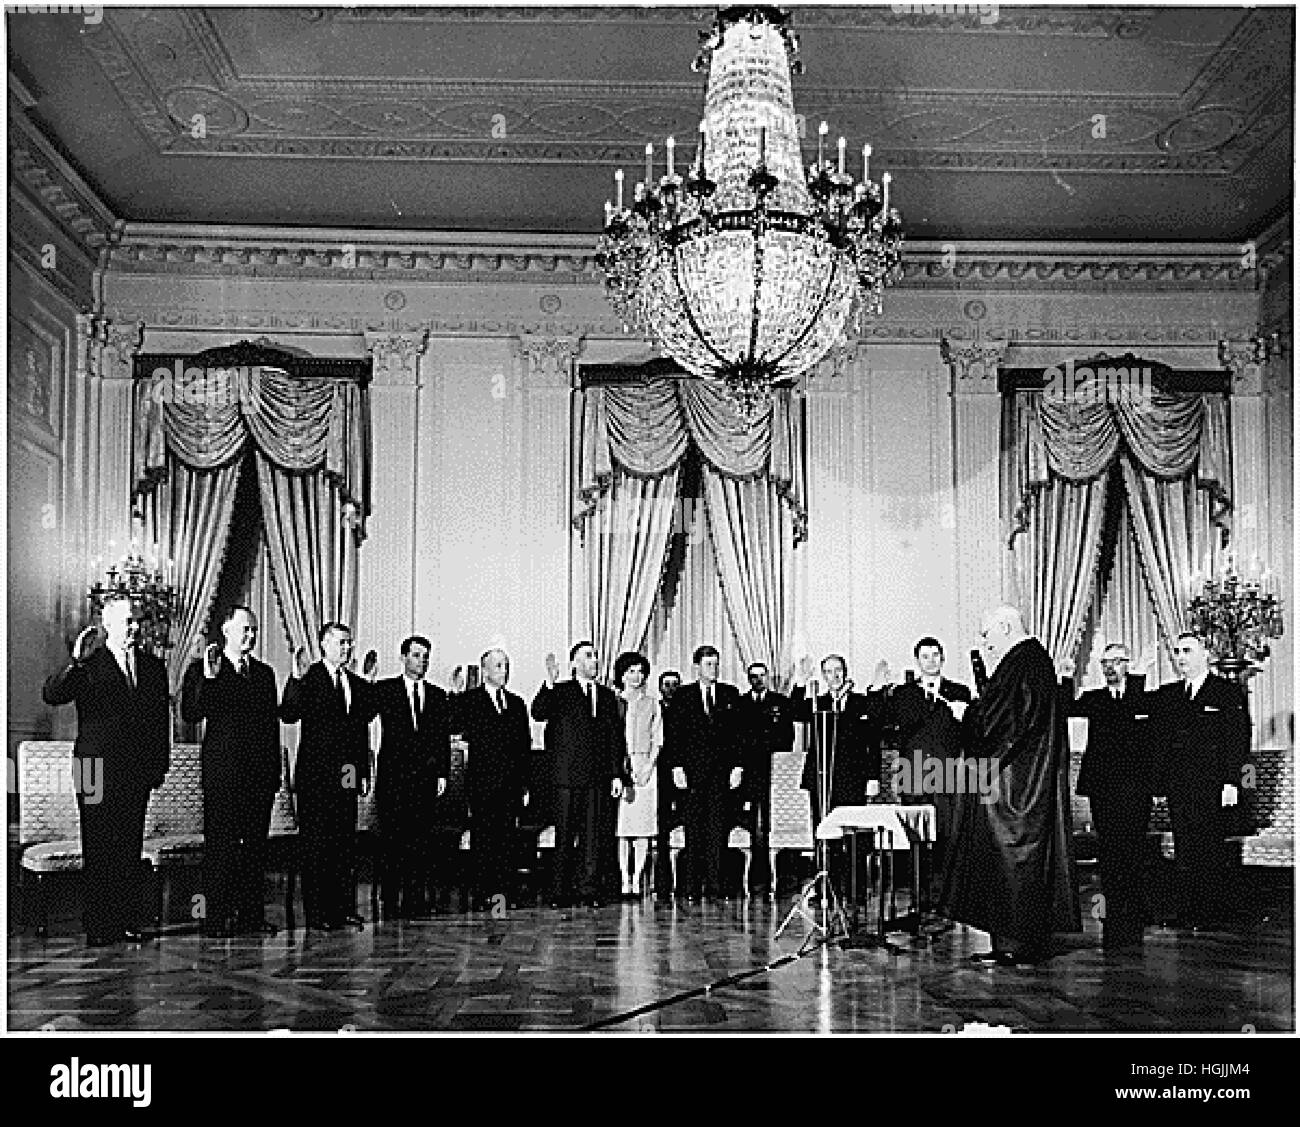 Swearing-In Ceremony of United States President John F. Kennedy's Cabinet in the East Room of the White House on January 21, 1961. U.S. Chief Justice Earl Warren administers Oath to (L-R) Dean Rusk, Secretary of State; Douglas Dillon, Secretary of the Treasury; Robert S. McNamara, Secretary of Defense; Robert F. Kennedy, Attorney General; J. Edward Day, Postmaster General; Stewart Udall, Secretary of Interior; First Lady Jacqueline Kennedy; U.S. President John F. Kennedy; Adlai E. Stevenson, U.S. Representative to the United Nations; Orville Freeman, Secretary of Agriculture; (hidden: Luther H Stock Photo